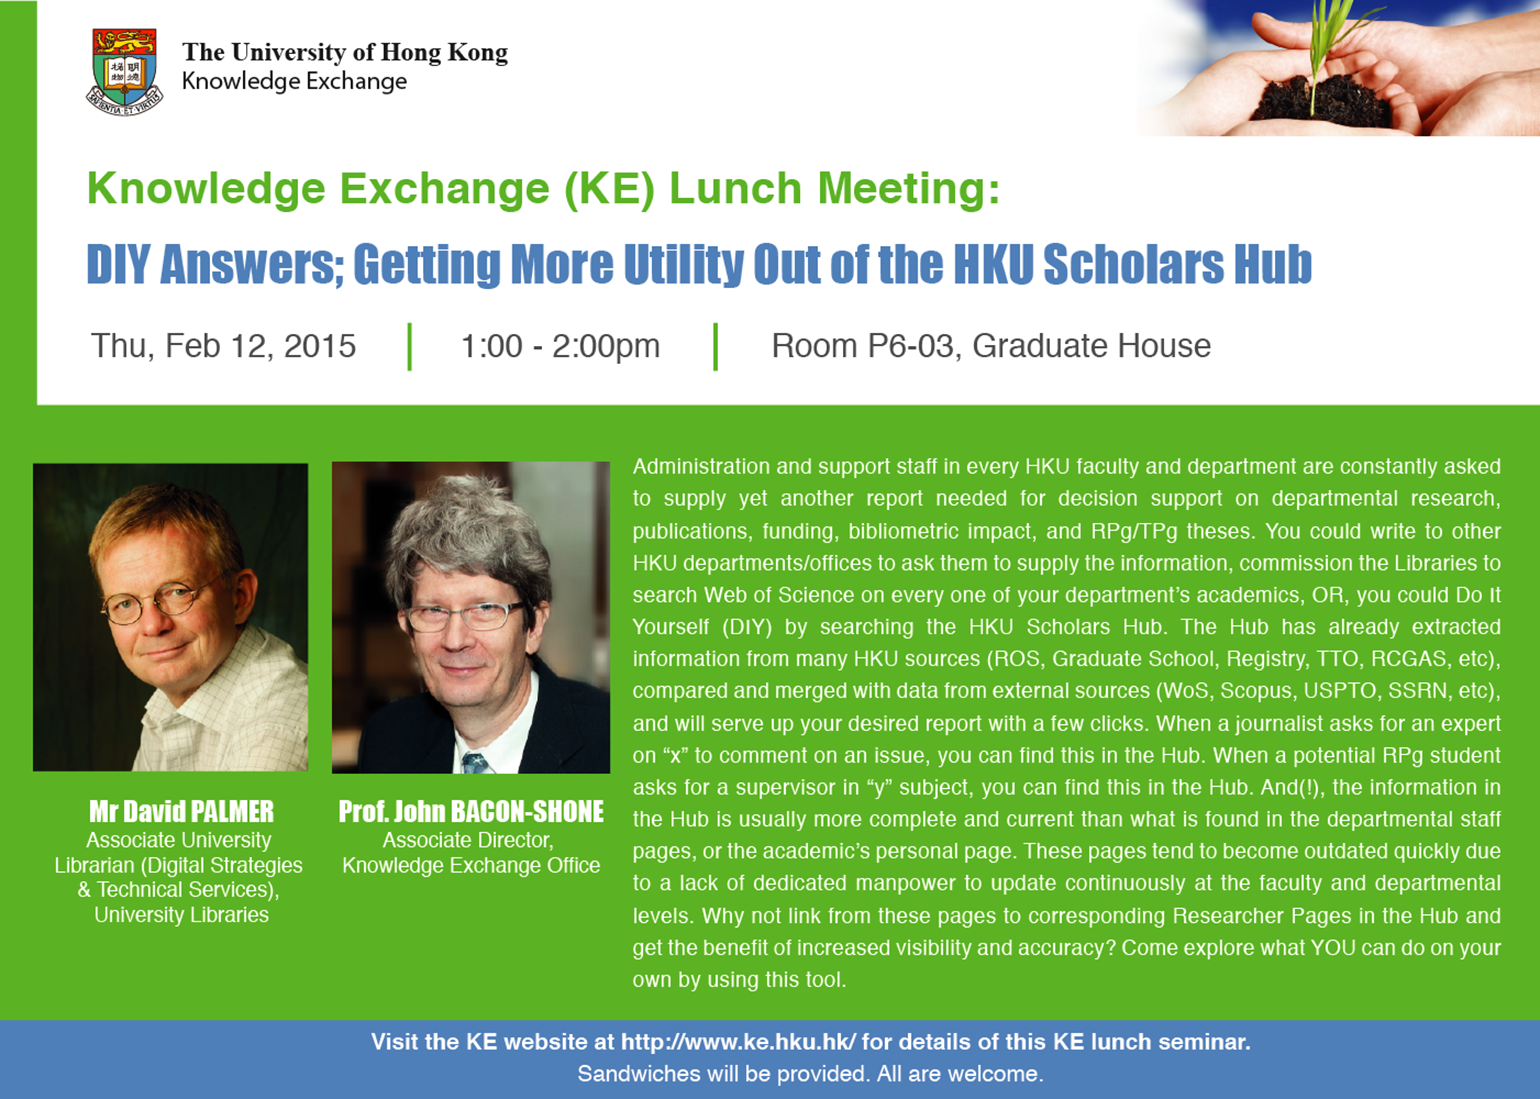 Knowledge Exchange (KE) lunch meeting: DIY Answers; Getting More Utility Out of the HKU Scholars Hub